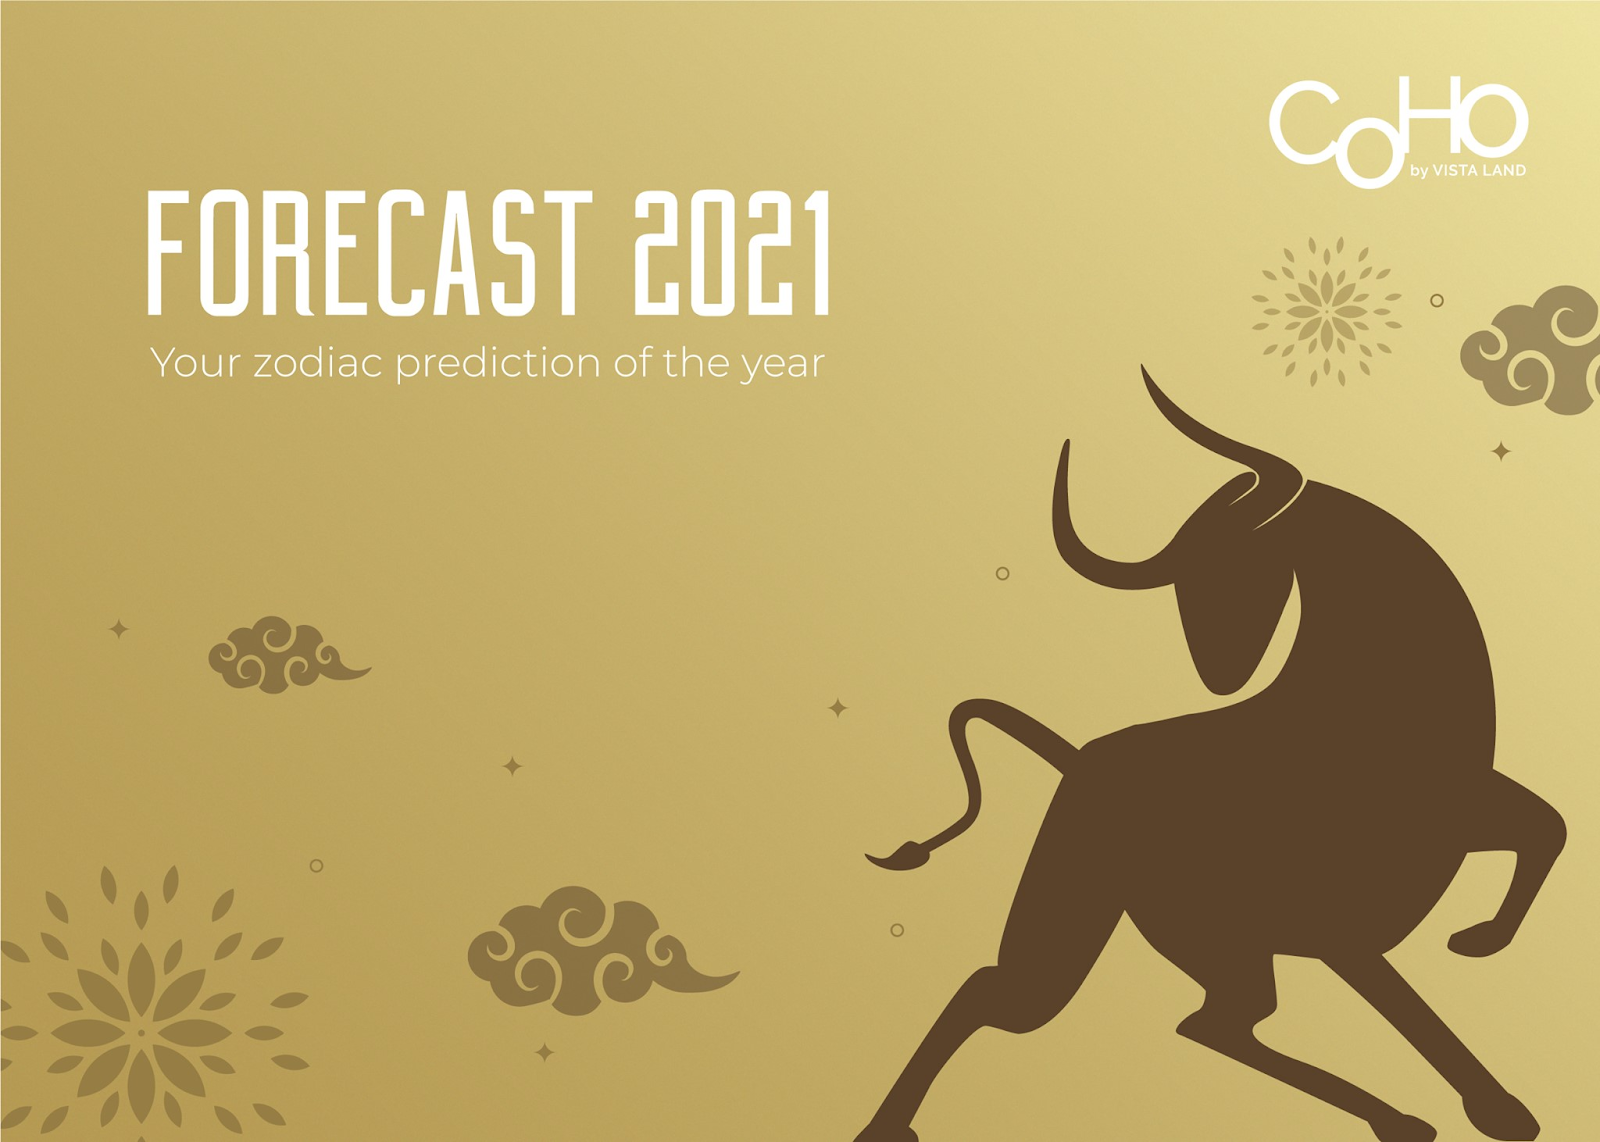 “Forecast 2021: Your zodiac prediction of the year” on Golden poster of Chinese Lunar Year with outline of Ox to signify Year of the Metal Ox, and small clouds and firework elements in the background